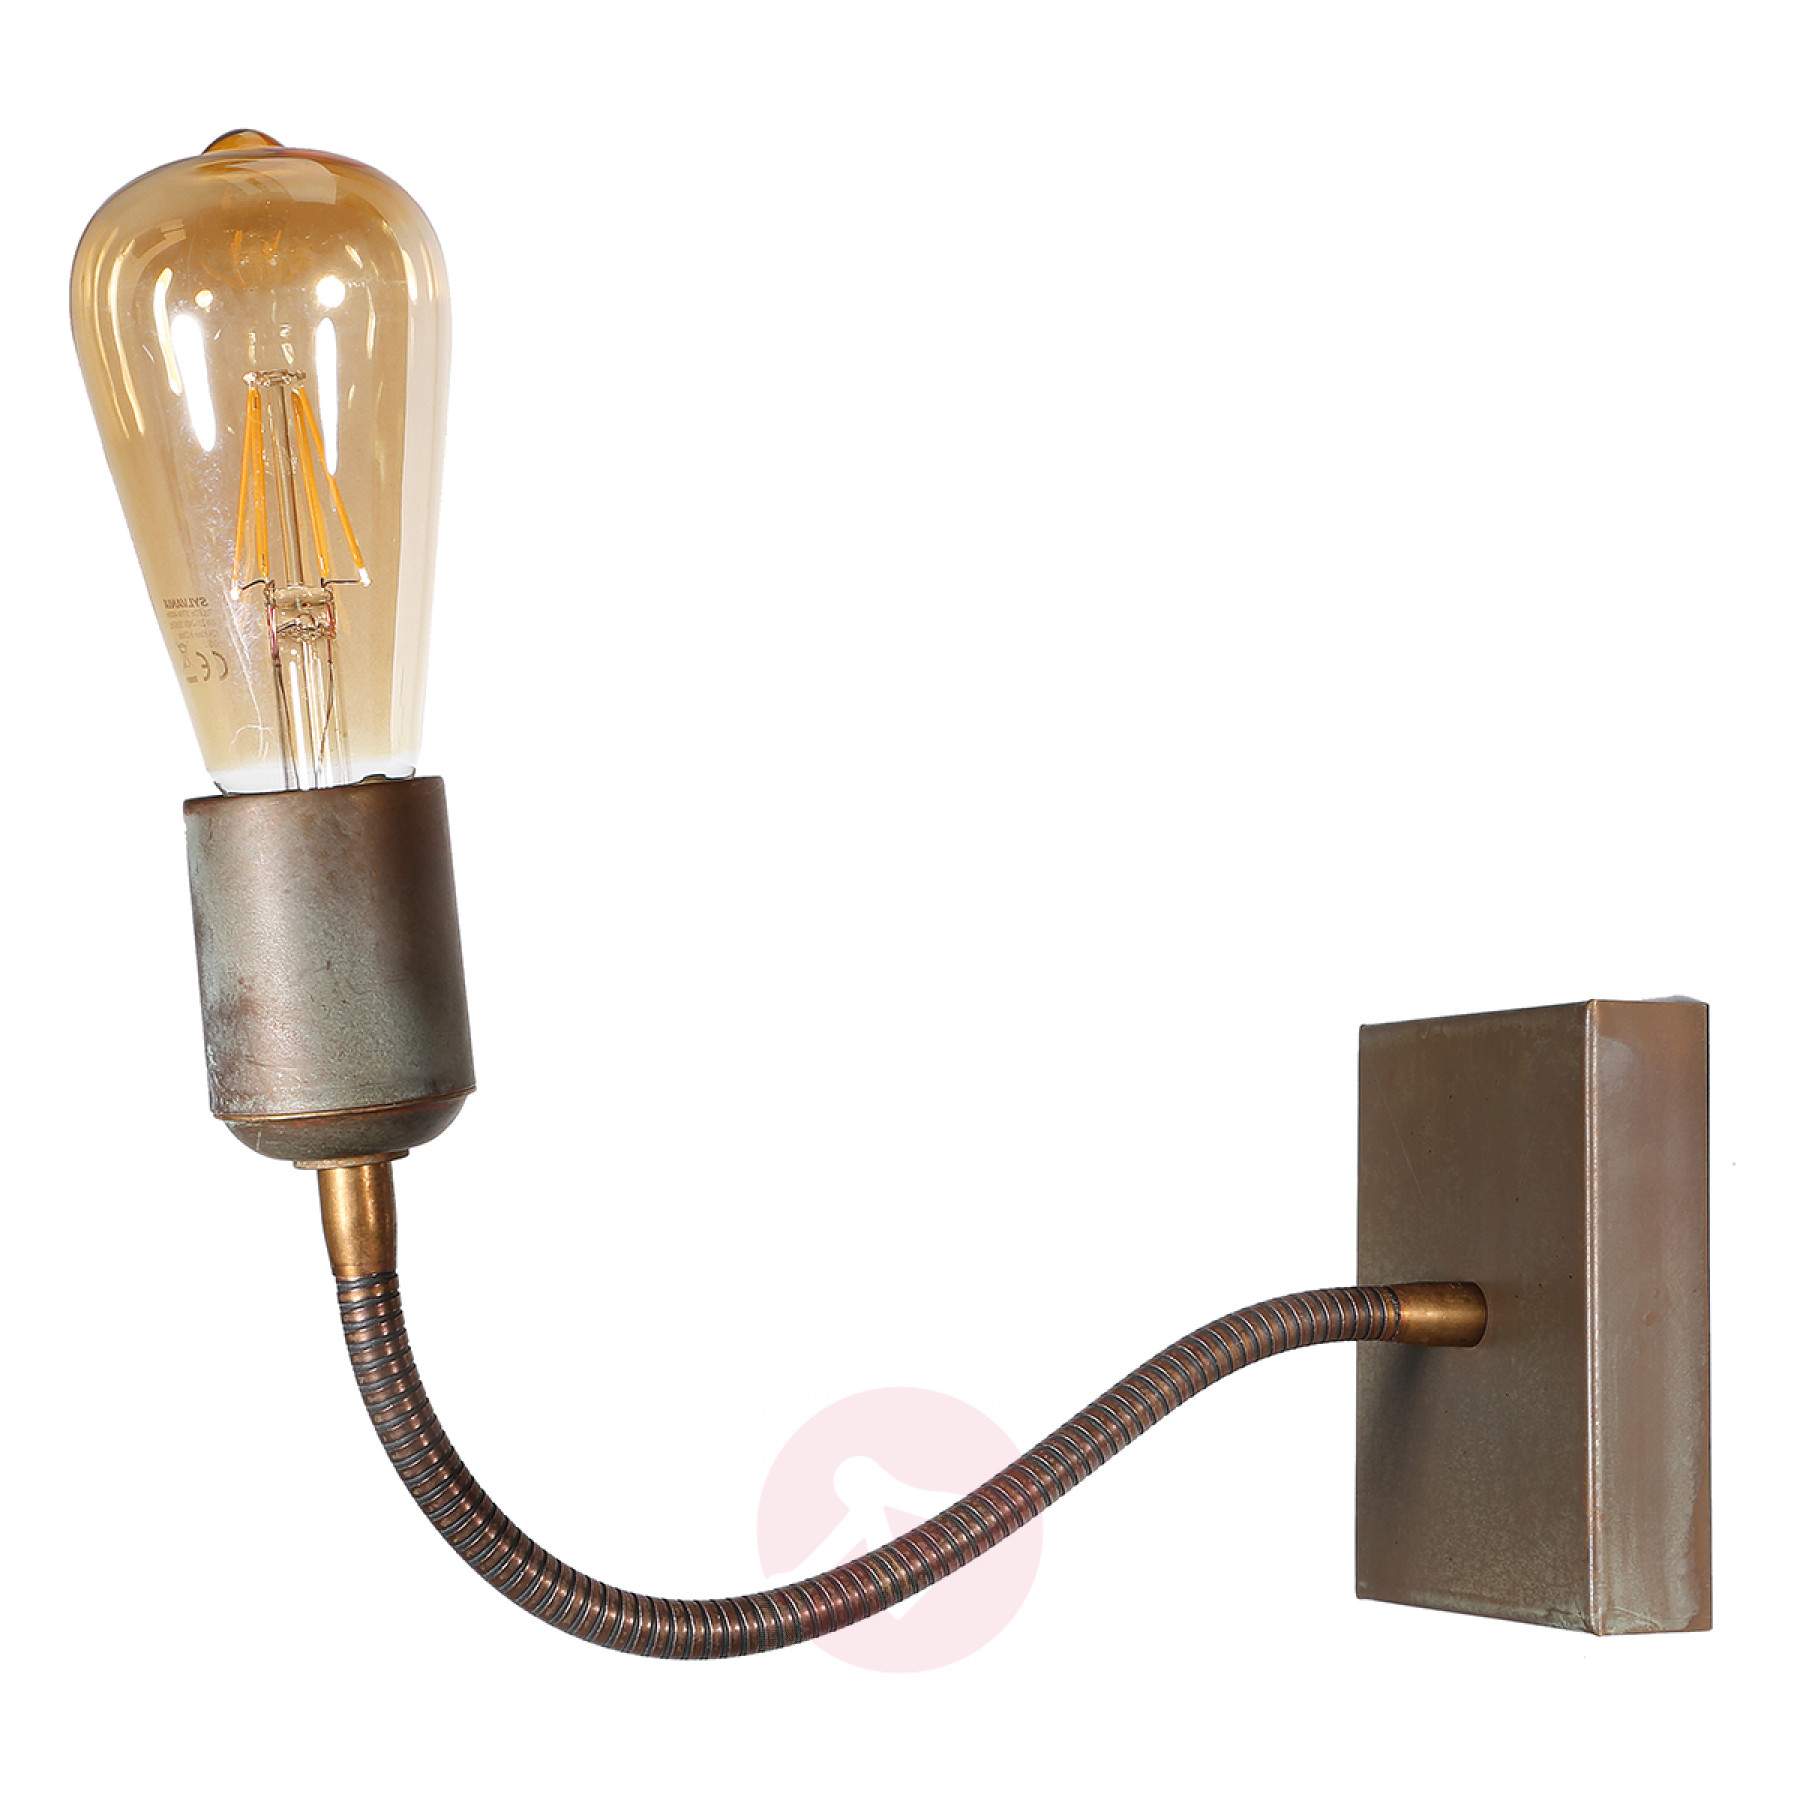 With flexible arm - wall lamp Orio made of brass | Lights.co.uk